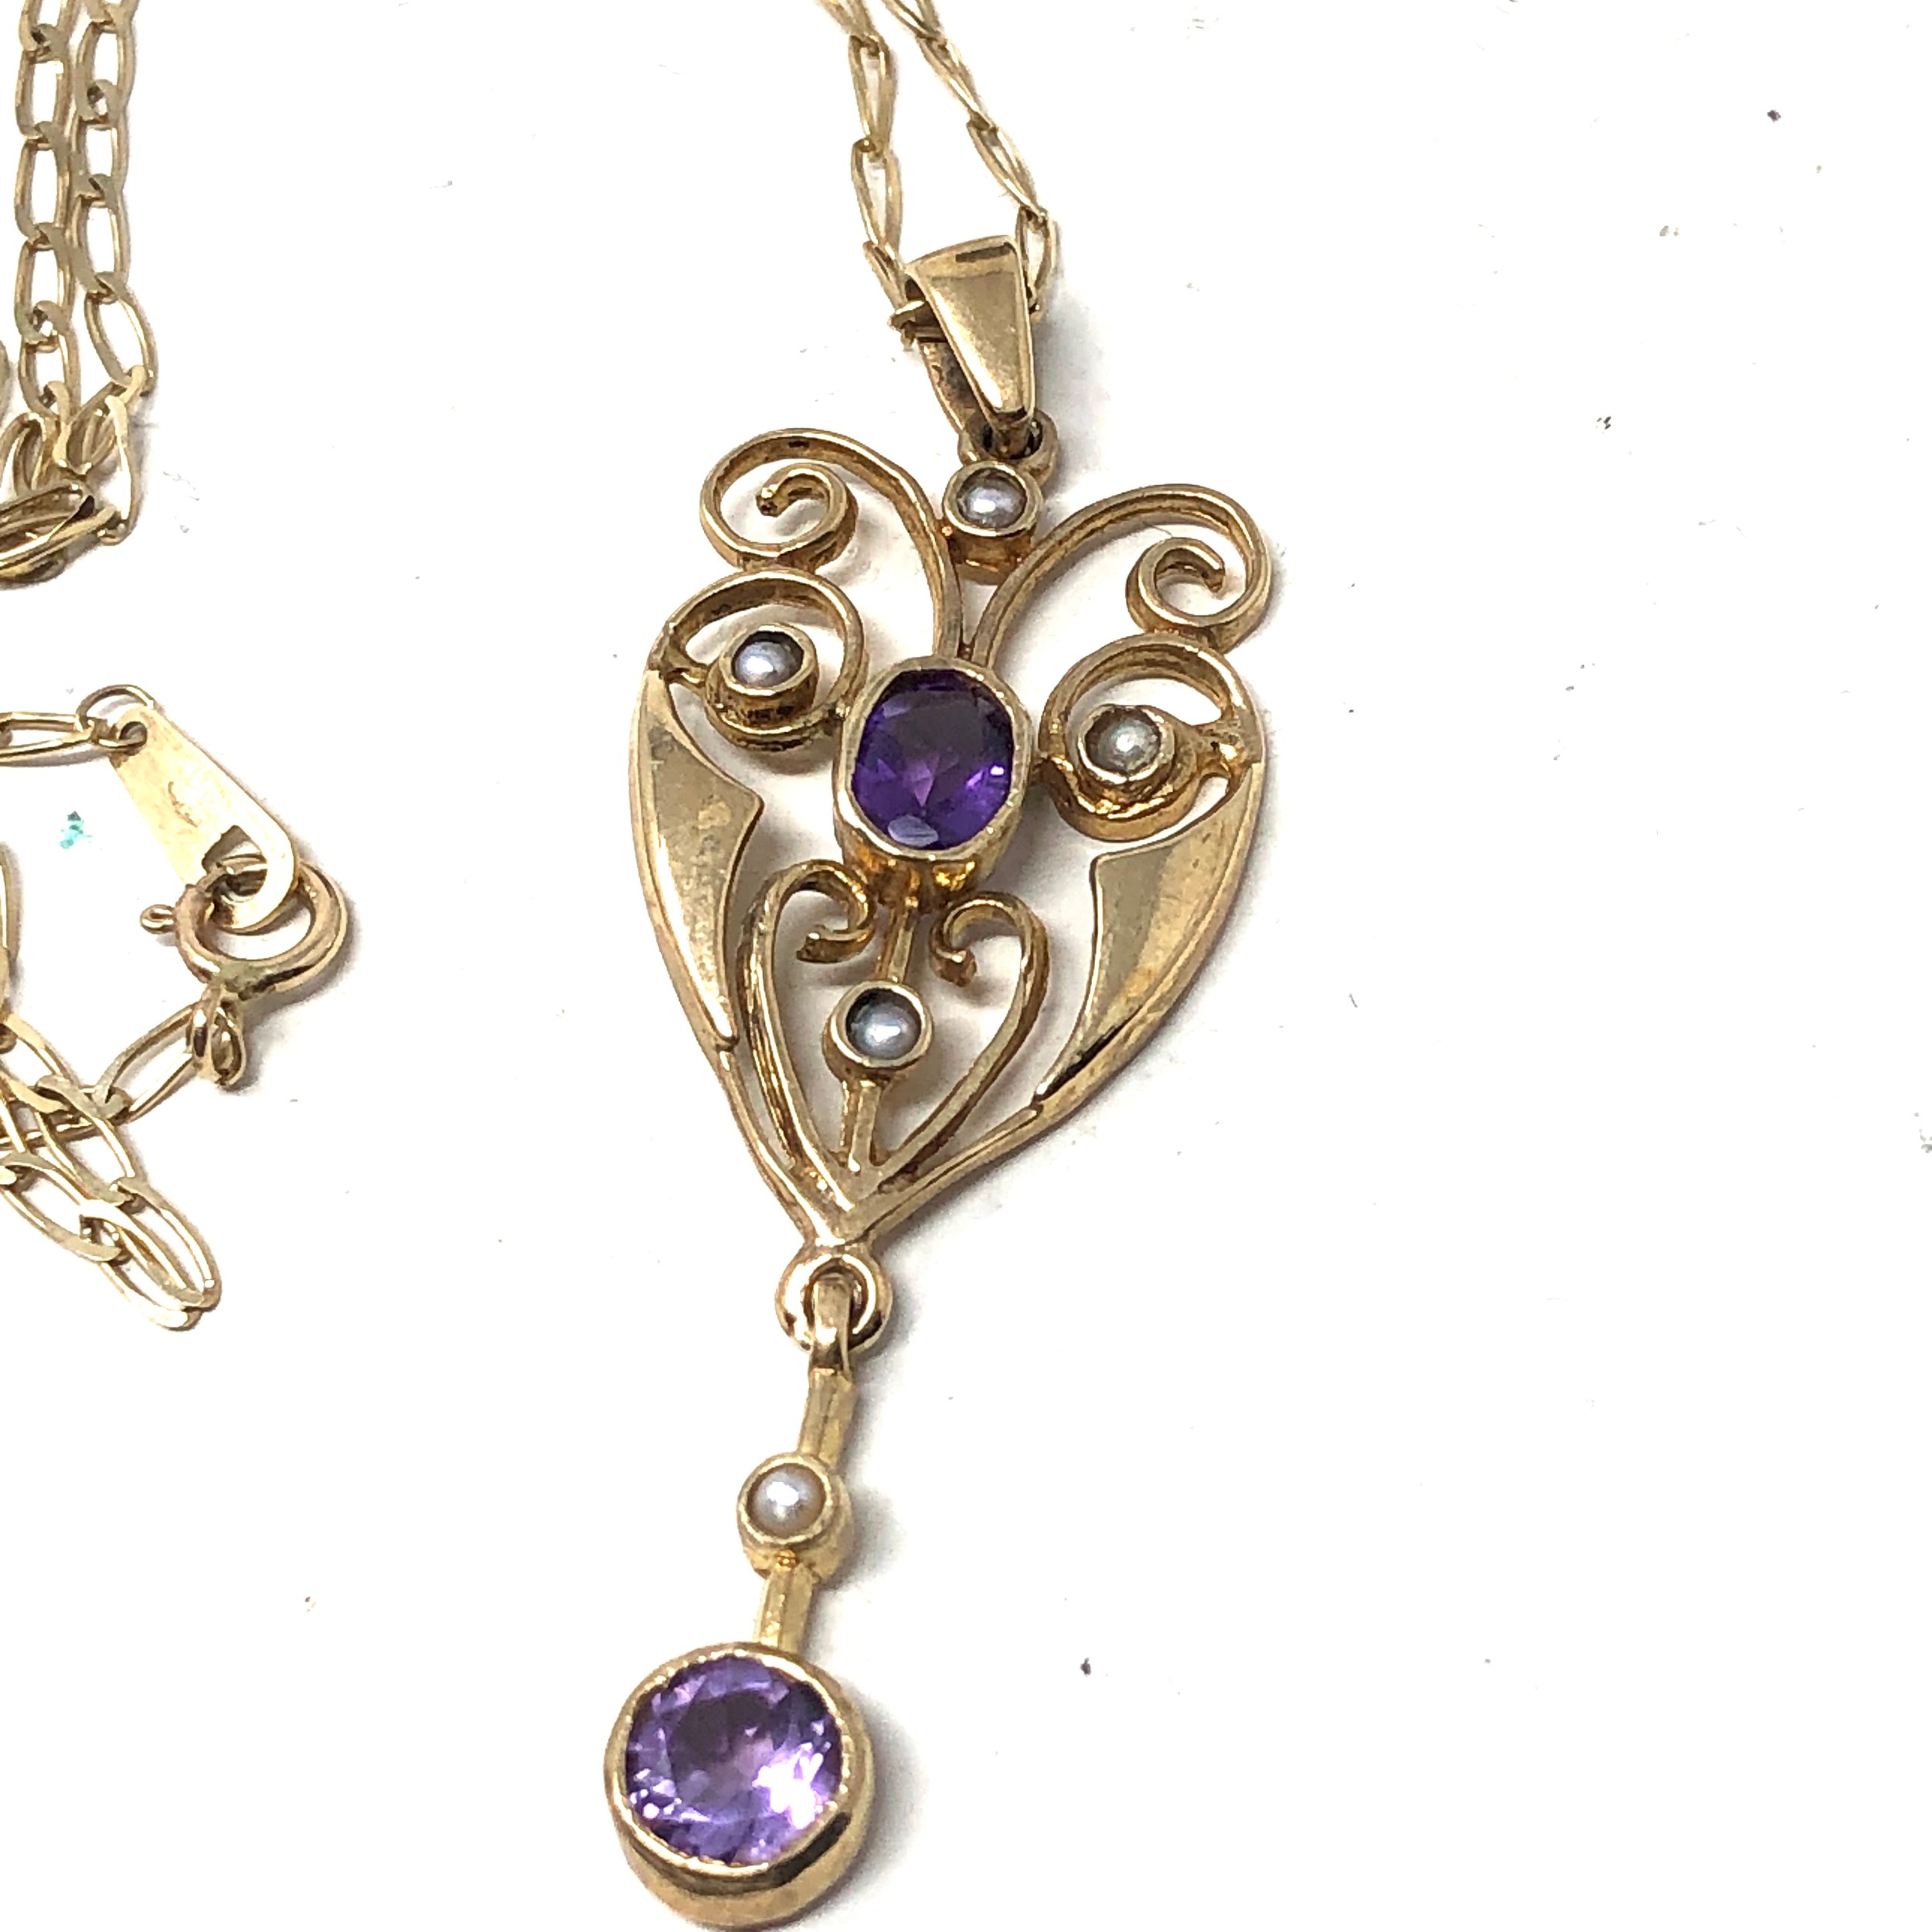 9ct gold amethyst & seed pearl lavalier pendant necklace (2.4g) - Image 2 of 3